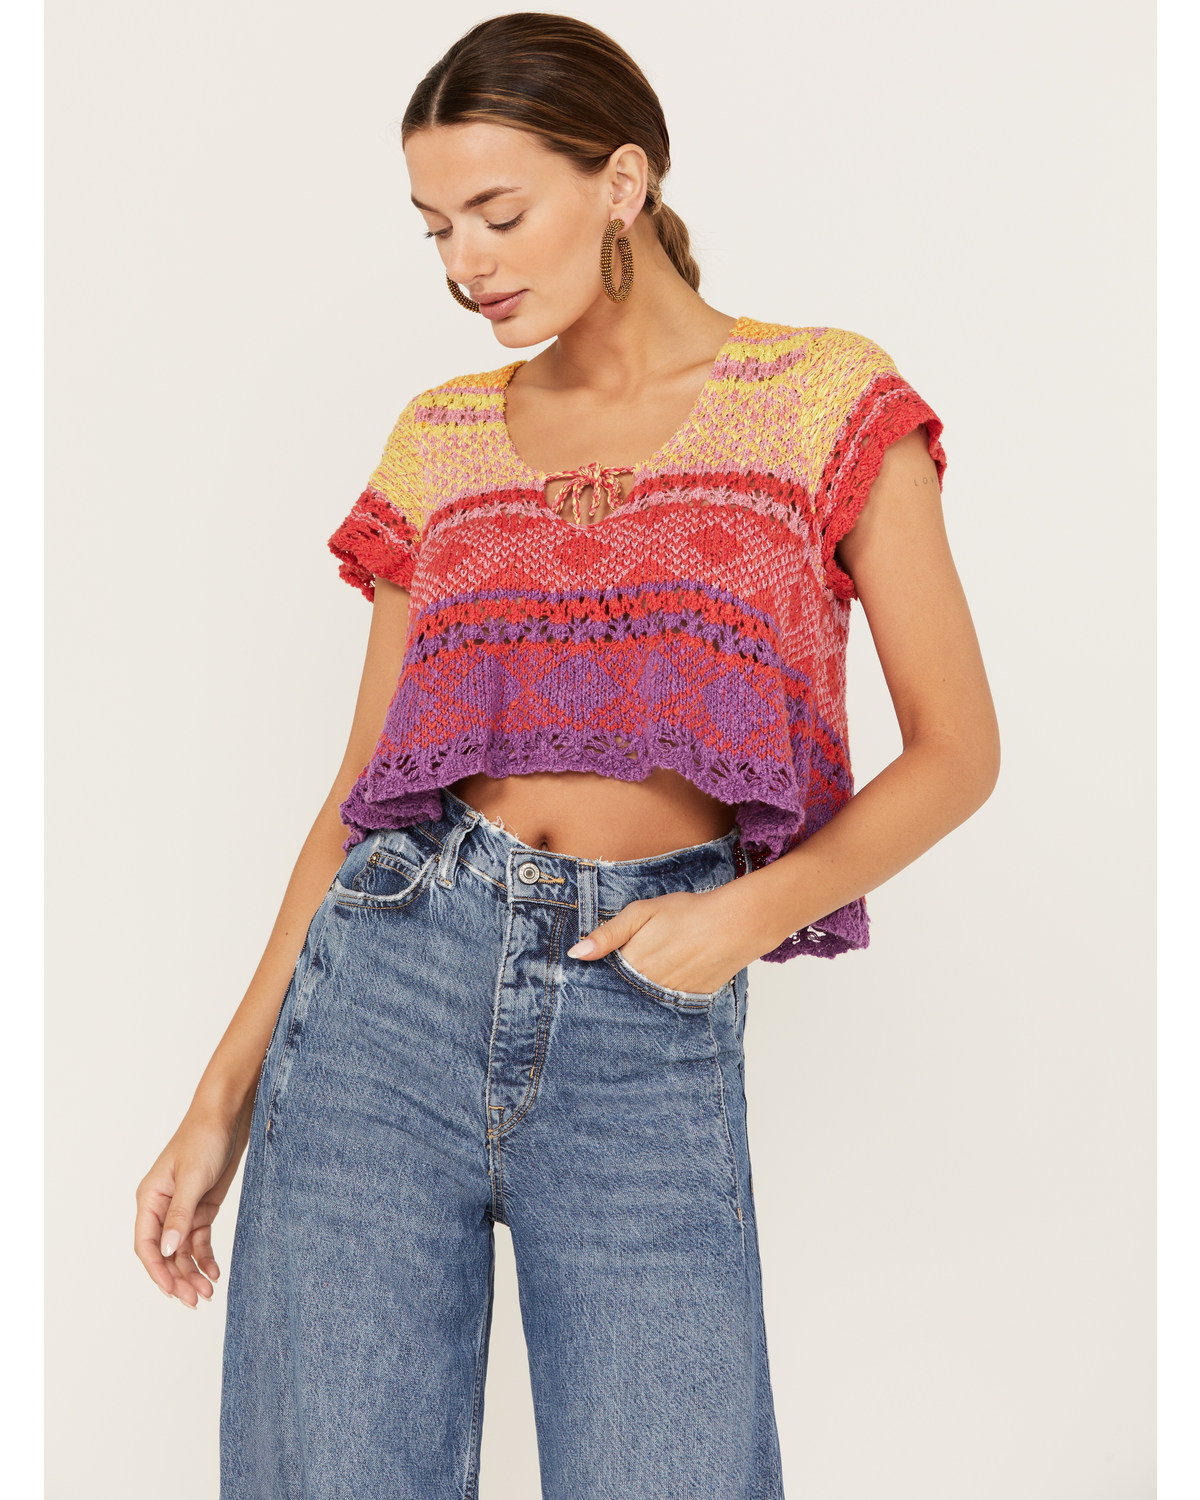 Free People Women's Lily Sweater Tee